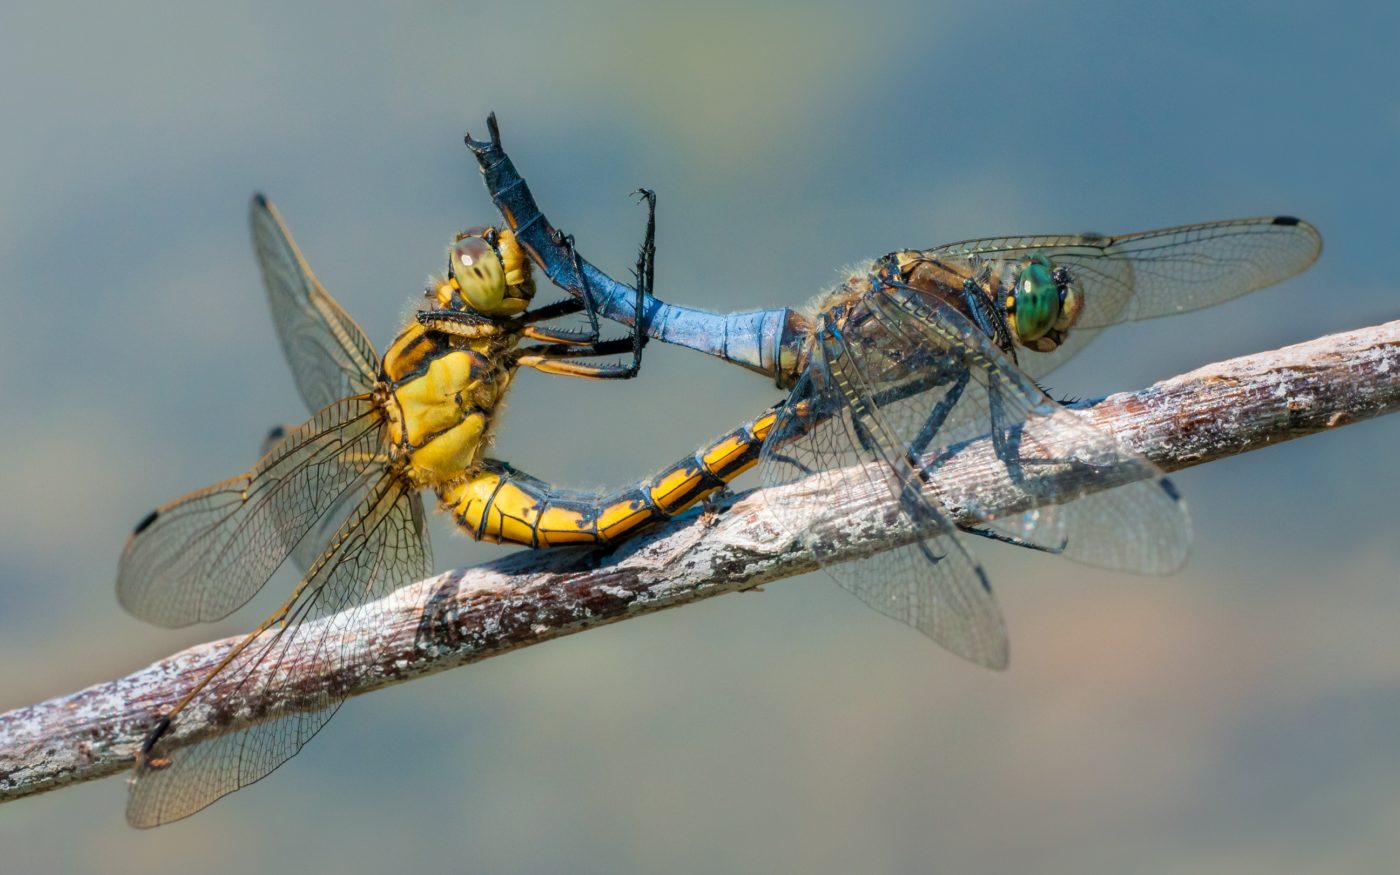 A pair of black-tailed skimmers (Orthetrum cancellatum) perching on a stem near the water at a local pond in Palovec while mating. This gave Petar Sabol the opportunity to capture this well-focused image of these two strikingly-coloured dragonflies.